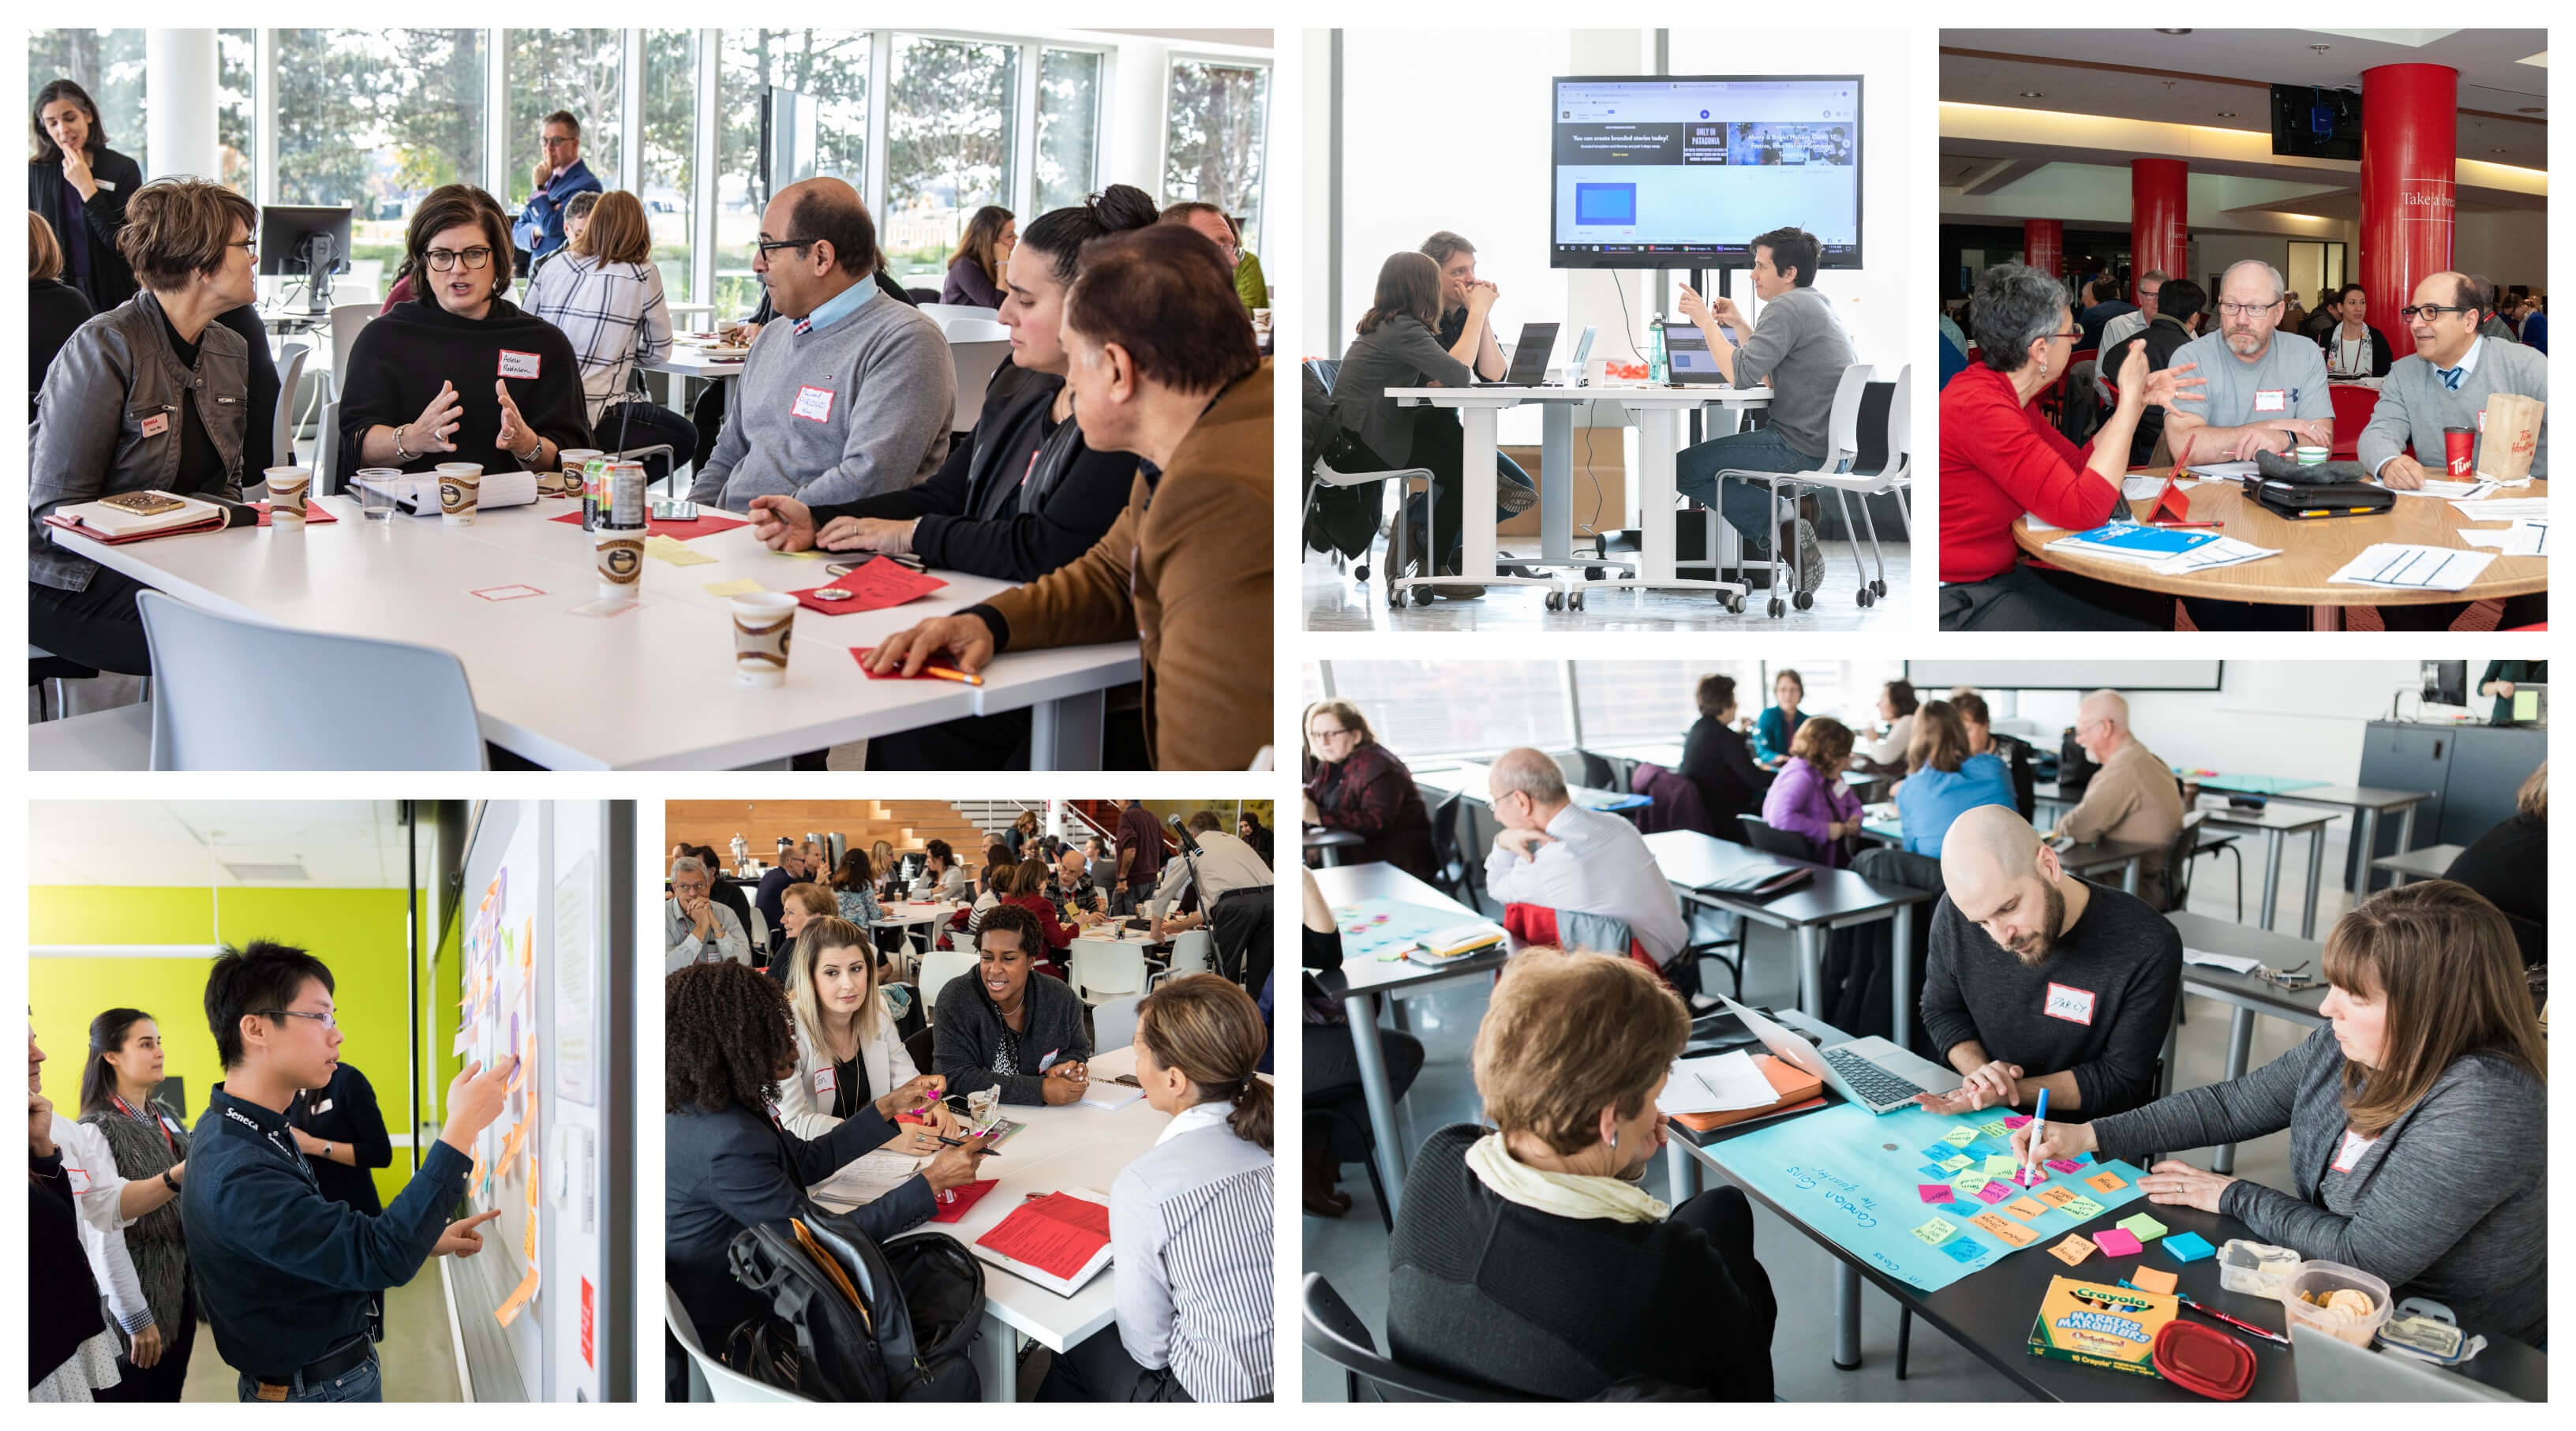 A collage of images of faculty speaking or working in groups